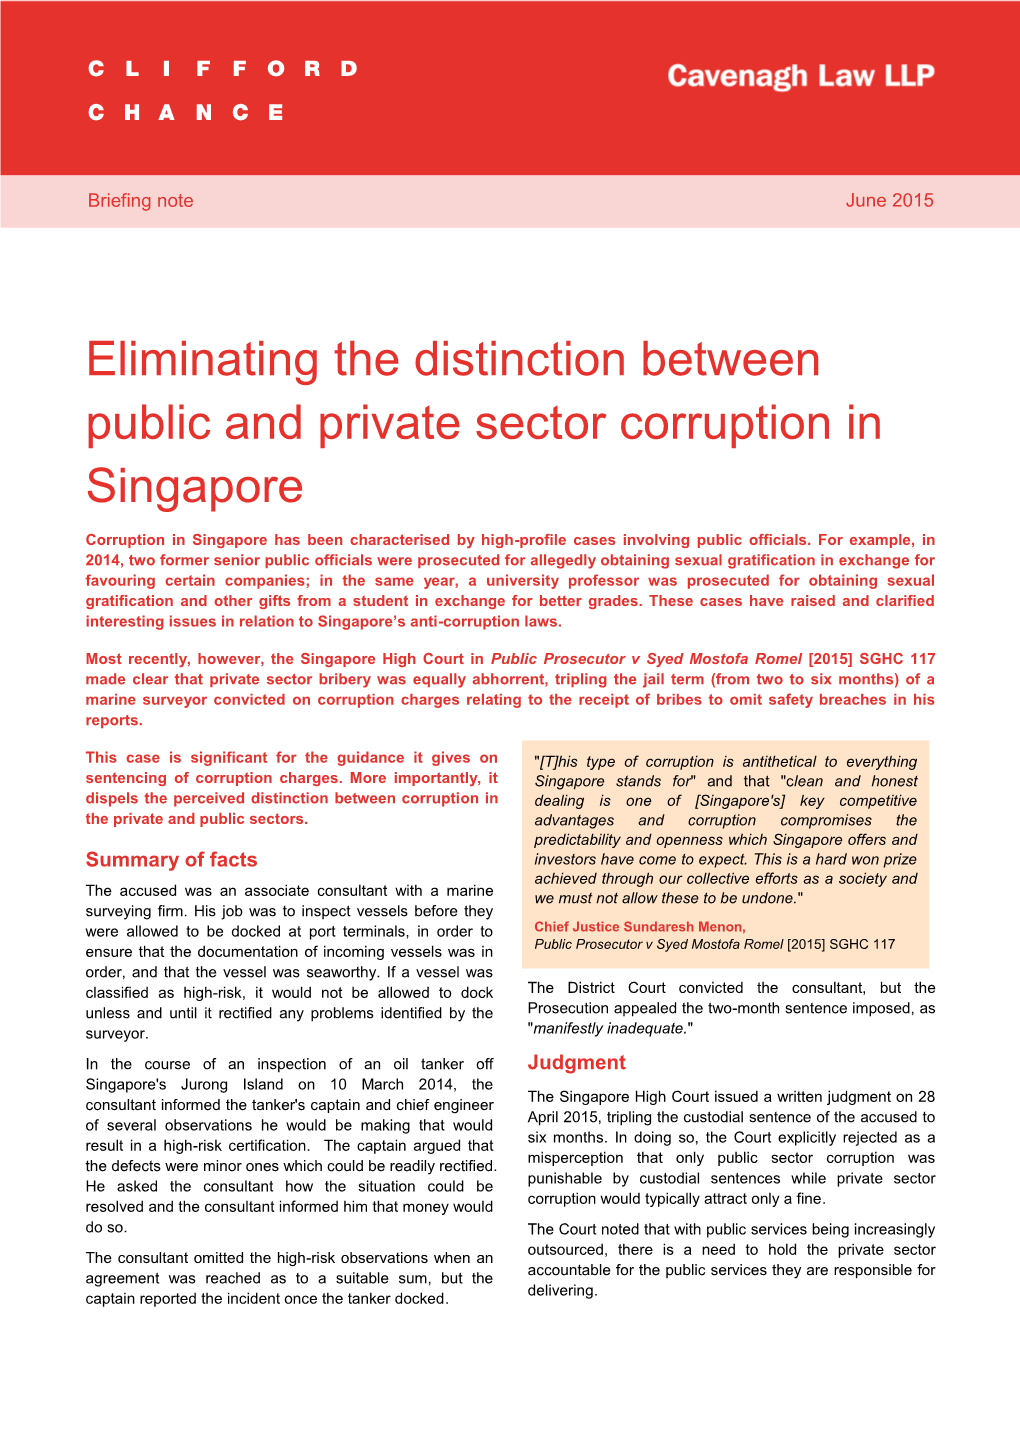 Eliminating the Distinction Between Public and Private Sector Corruption in Singapore 1